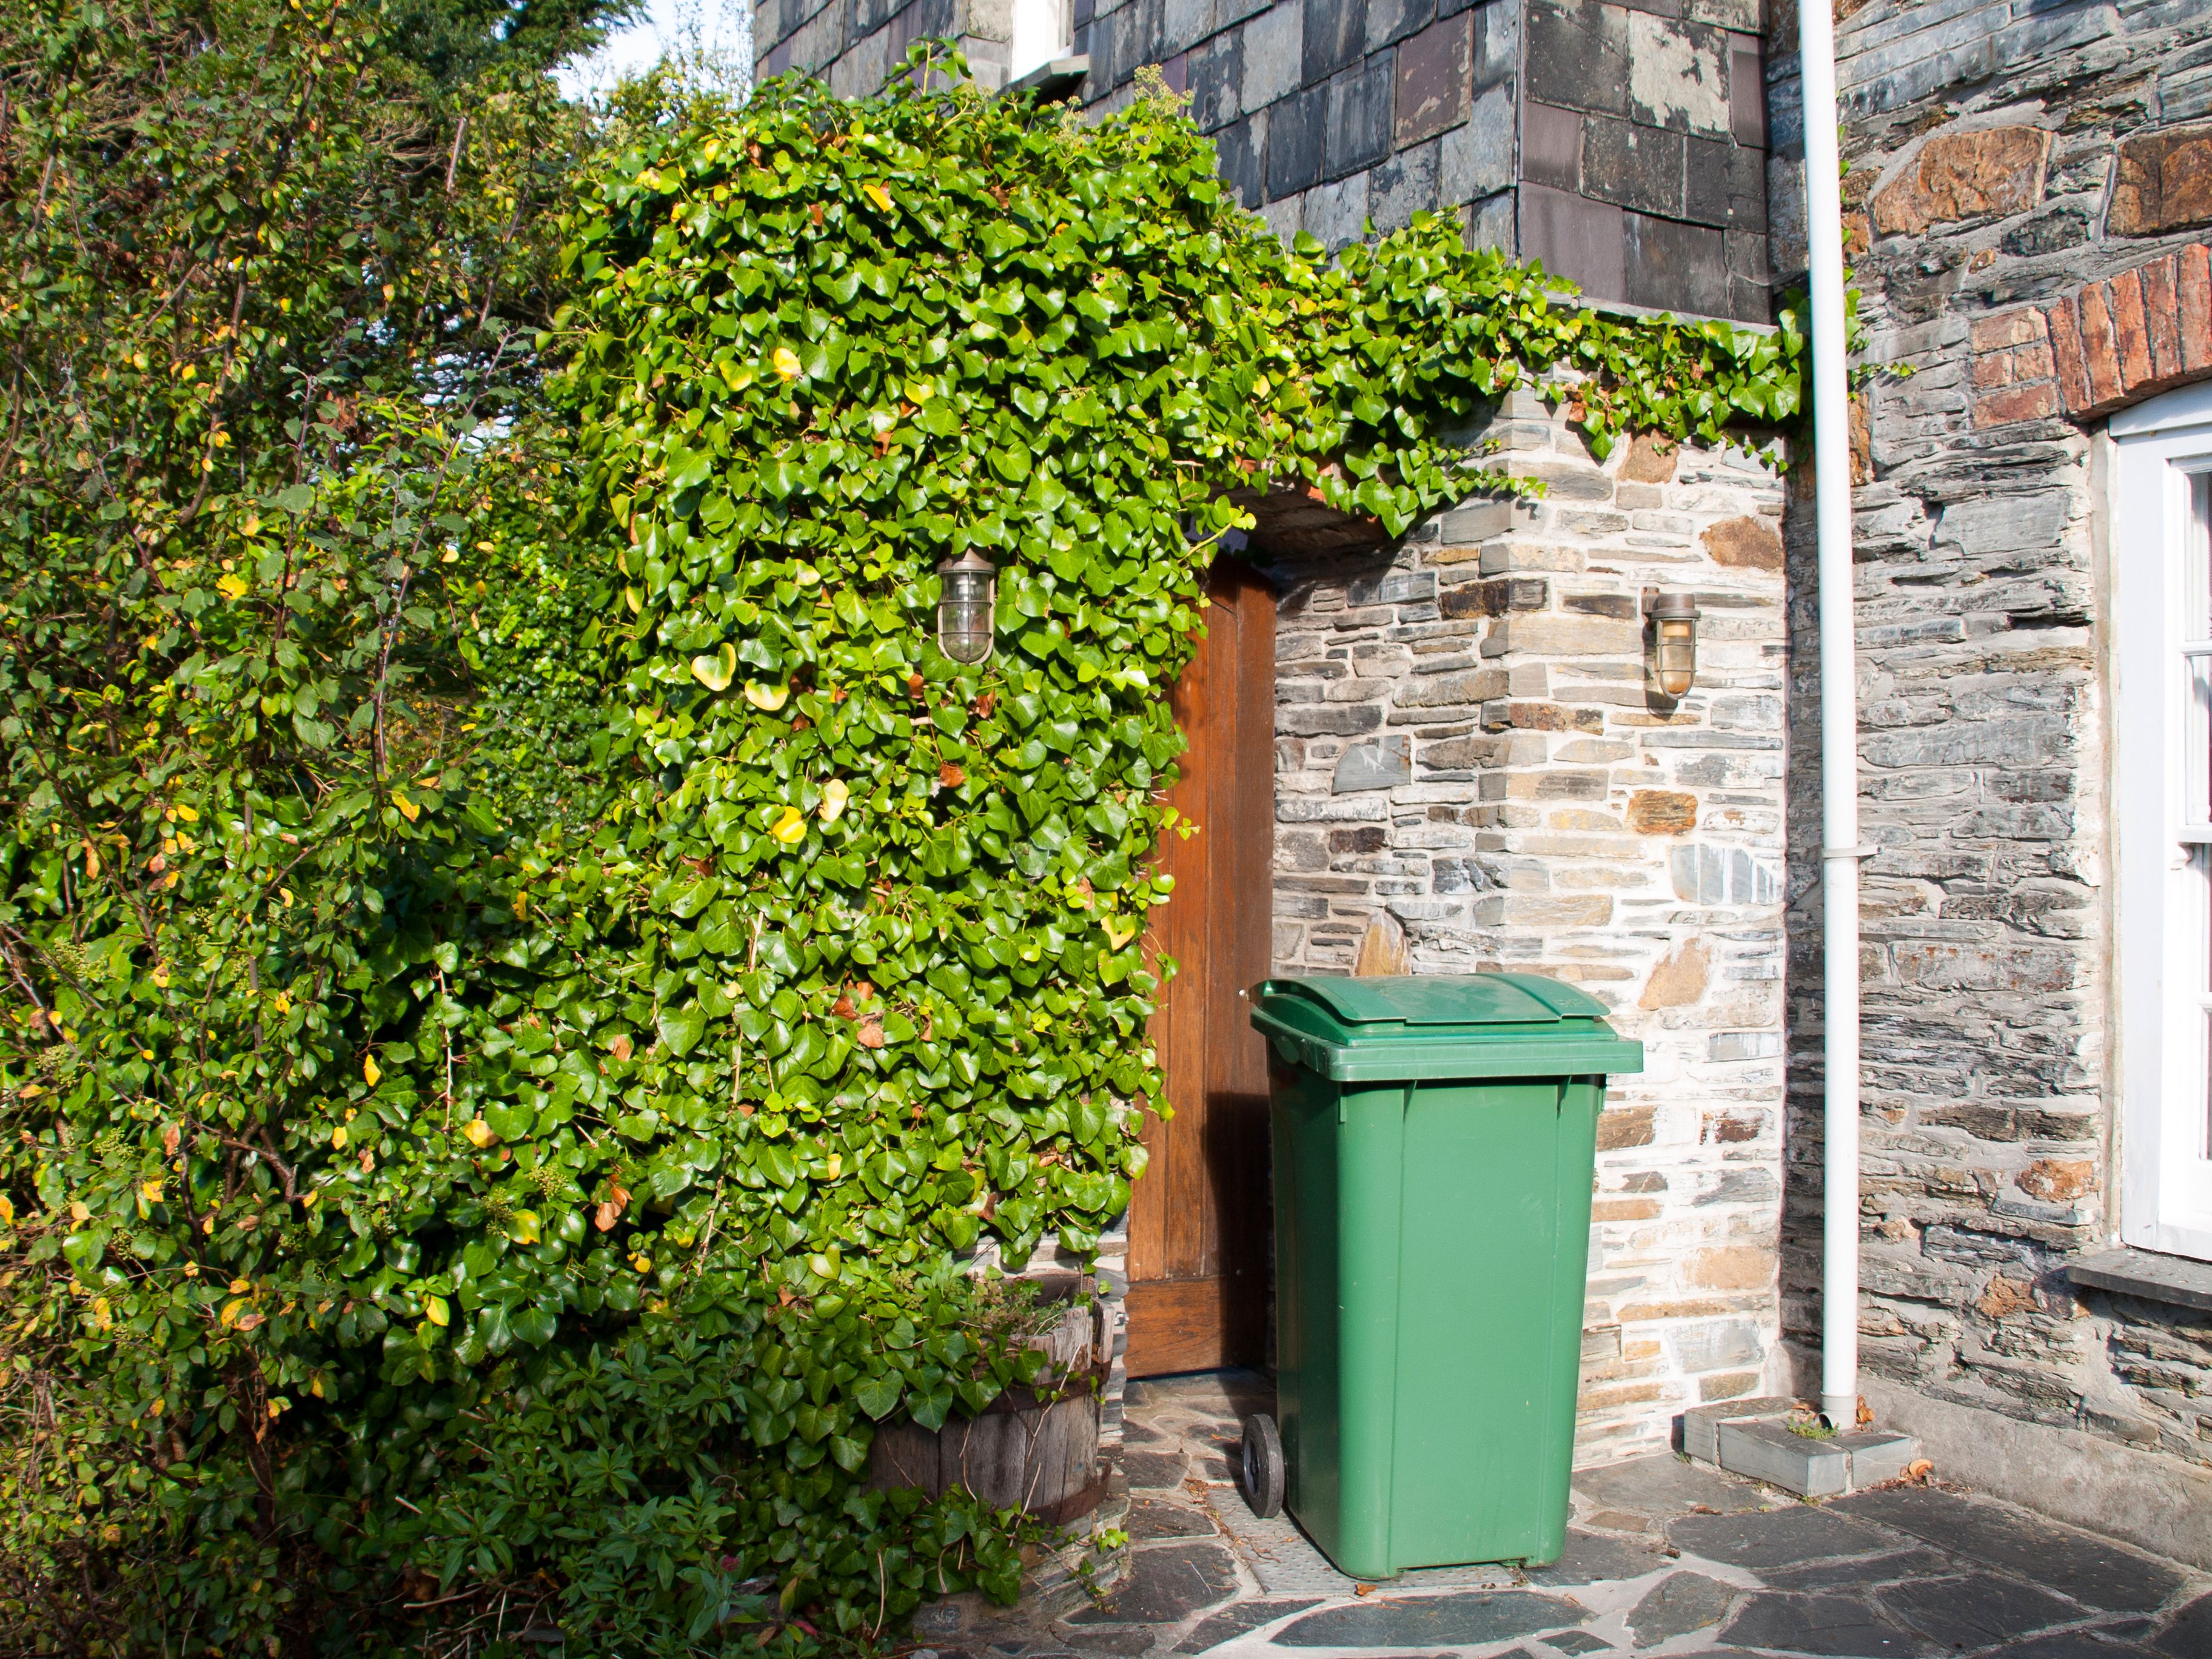 Green wheelie bin sitting by a garden wall with ivy climbing up the stonework